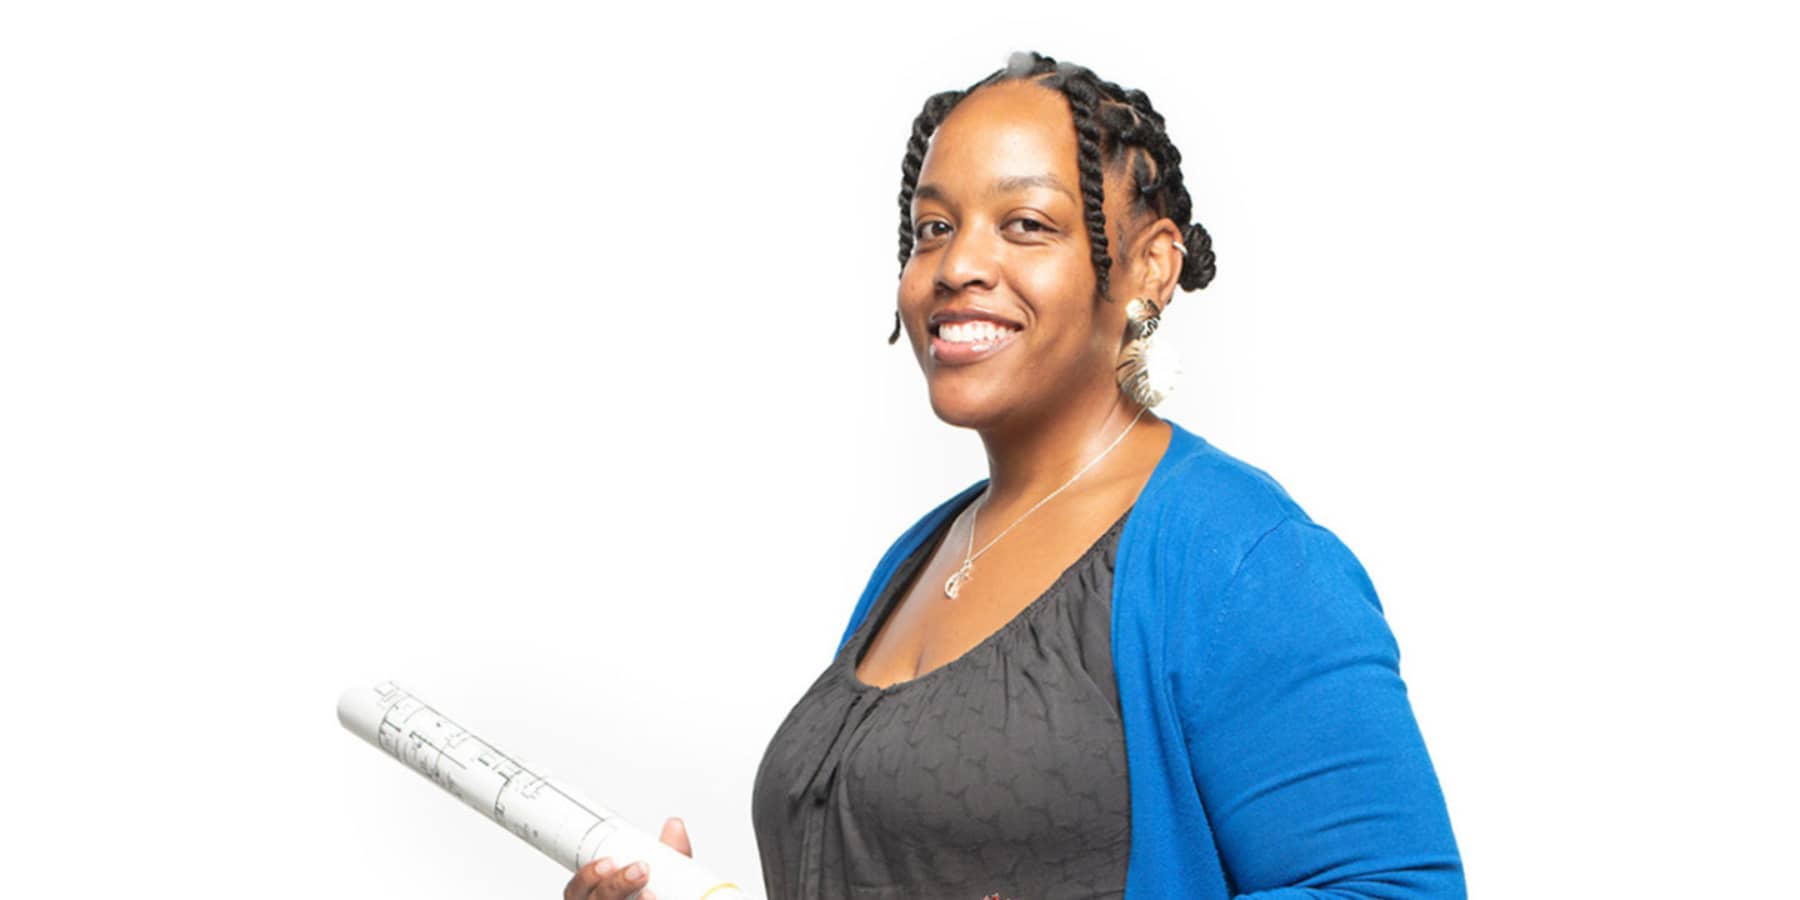 Professor of Interior Architectural Design Azizi Arrington-Slocum, a smiling Black woman with black braided hair, wearing a grey shirt with a blue jacket, and holding a set of rolled-up architectural designs.